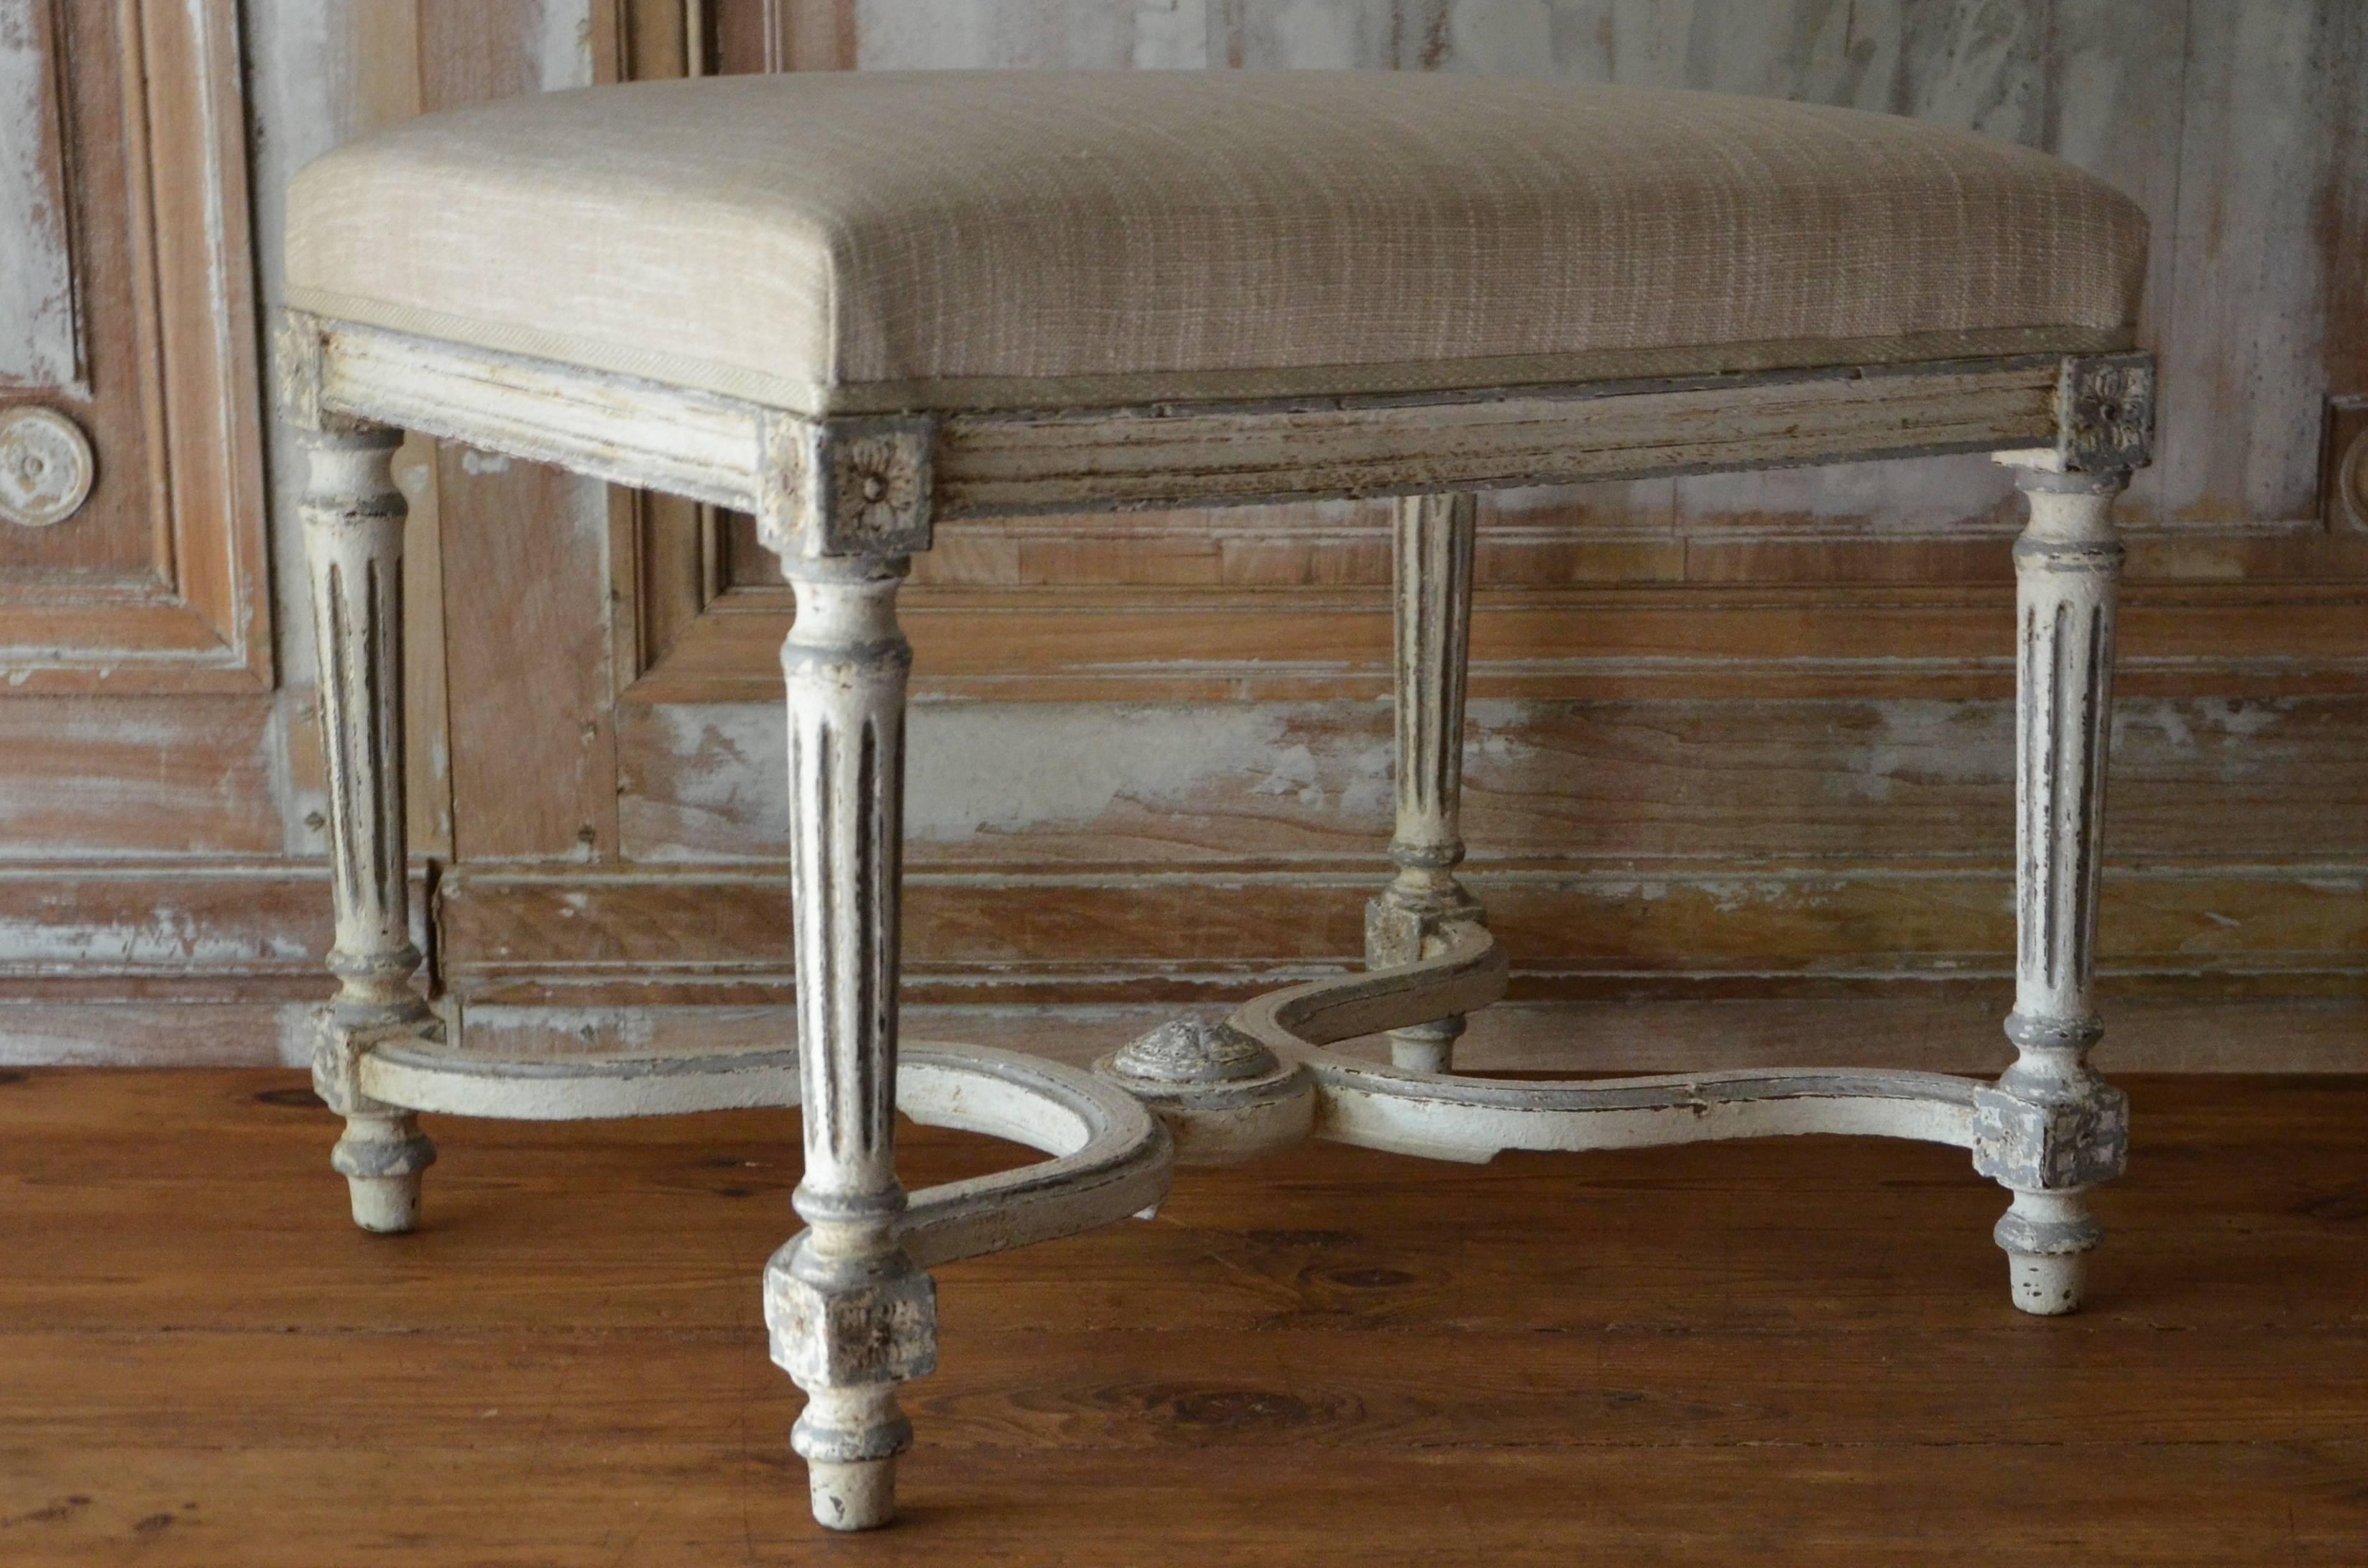 A small painted bench in Louis XVI style, with legs conical flutings and joining dies decorated with a classical daisy motifs and joined with double x-curved stretchers. Upholstered in linen.
France circa 1900
Condition: Excellent